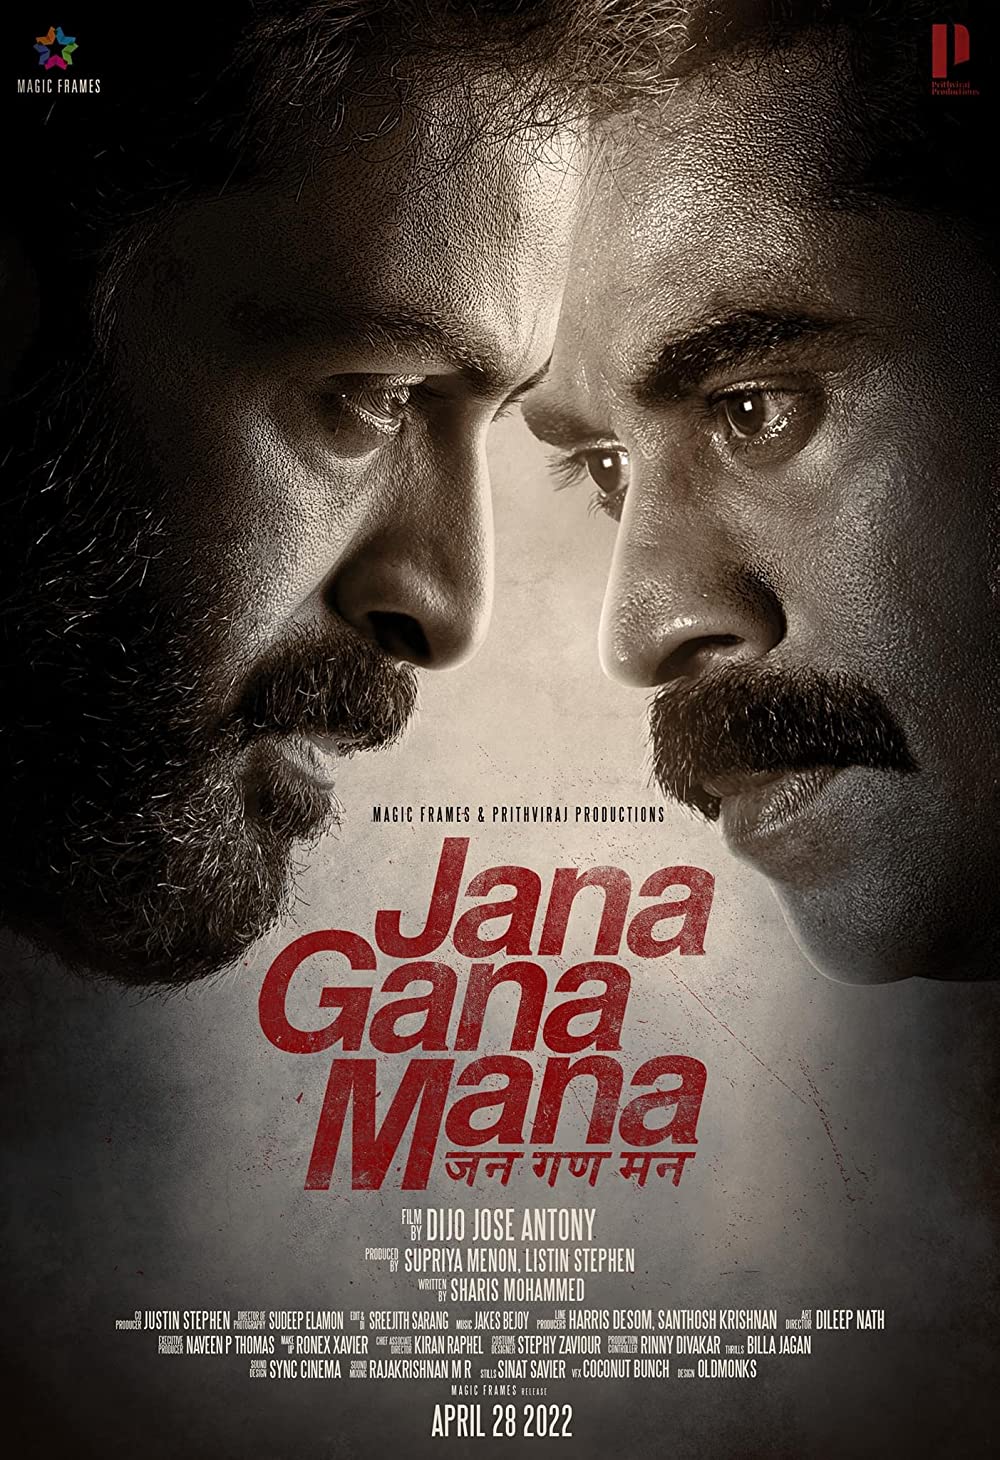 Jana Gana Mana movie review: A political rat race that resembles the current society where people are fooled through pure emotion.